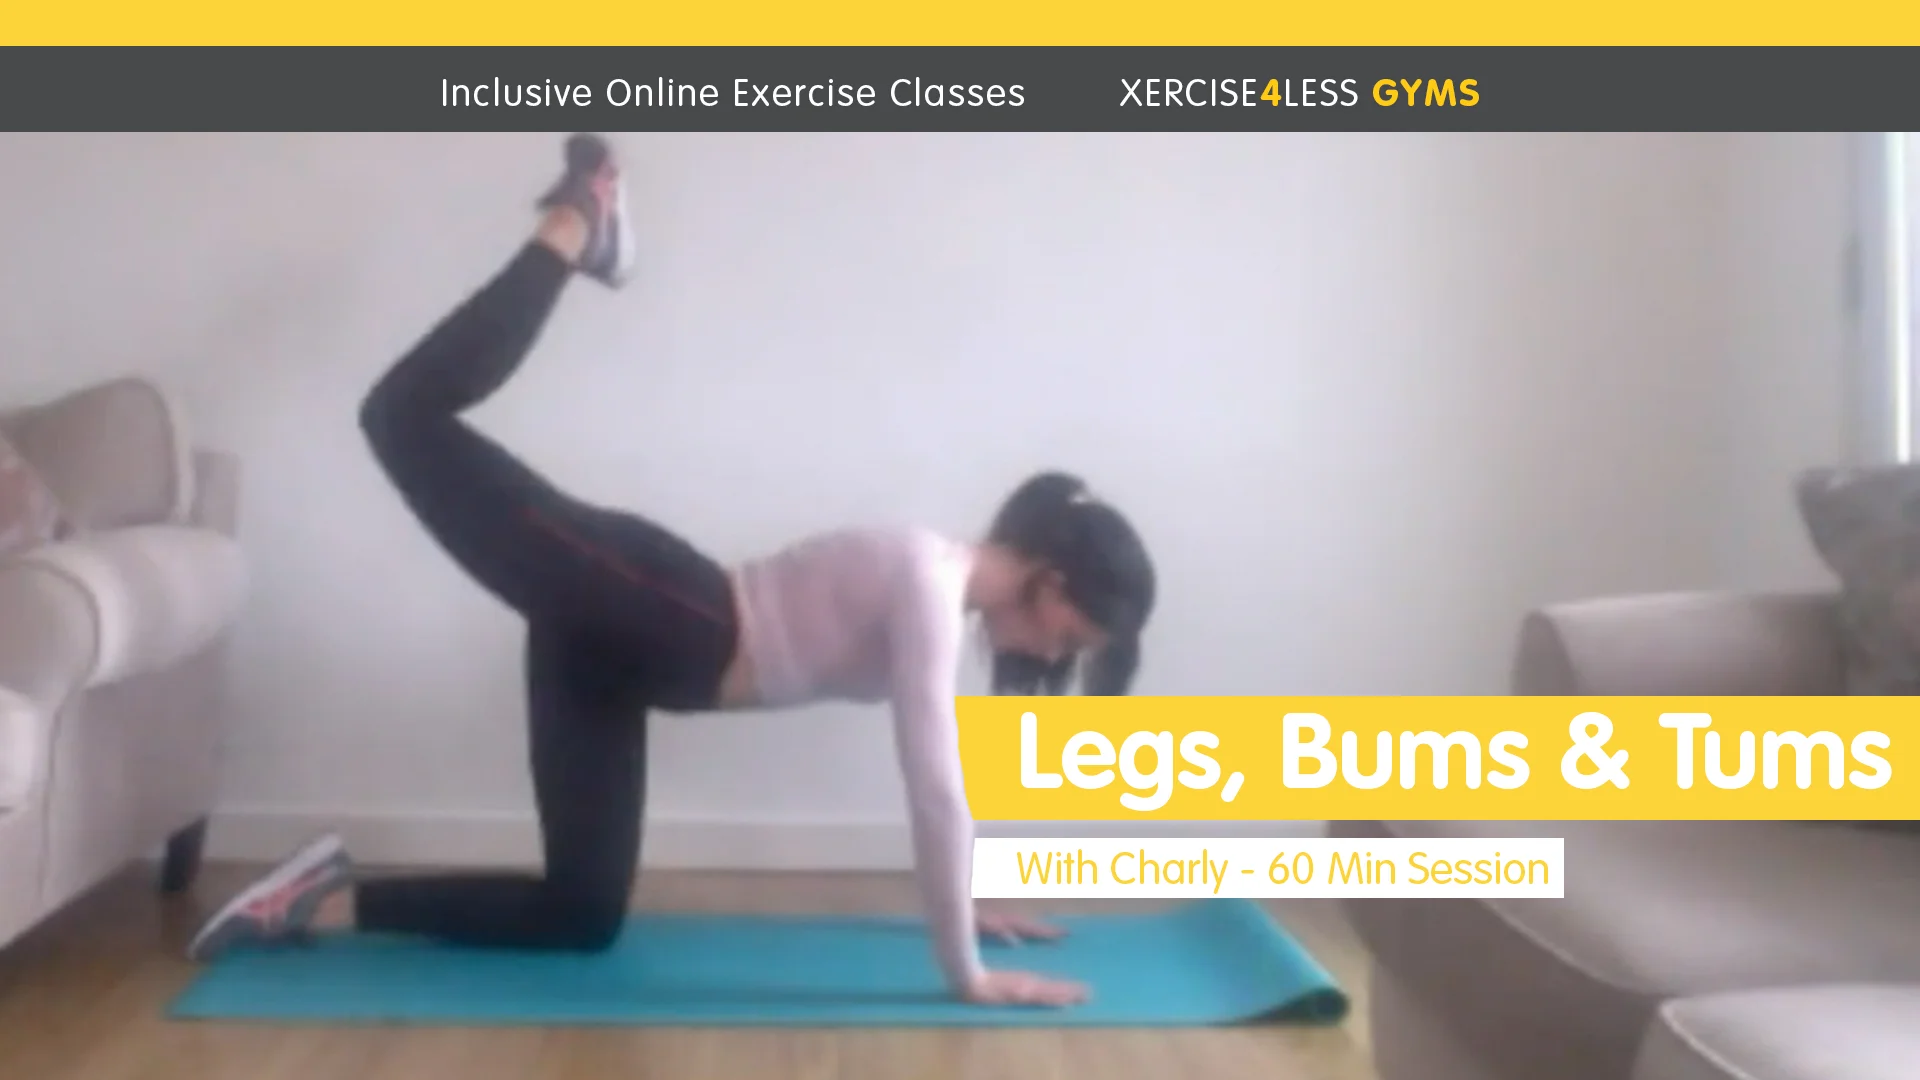 03/05 - Legs, Bums and Tums Class - Charly - 11am Sunday - 60m Session on  Vimeo